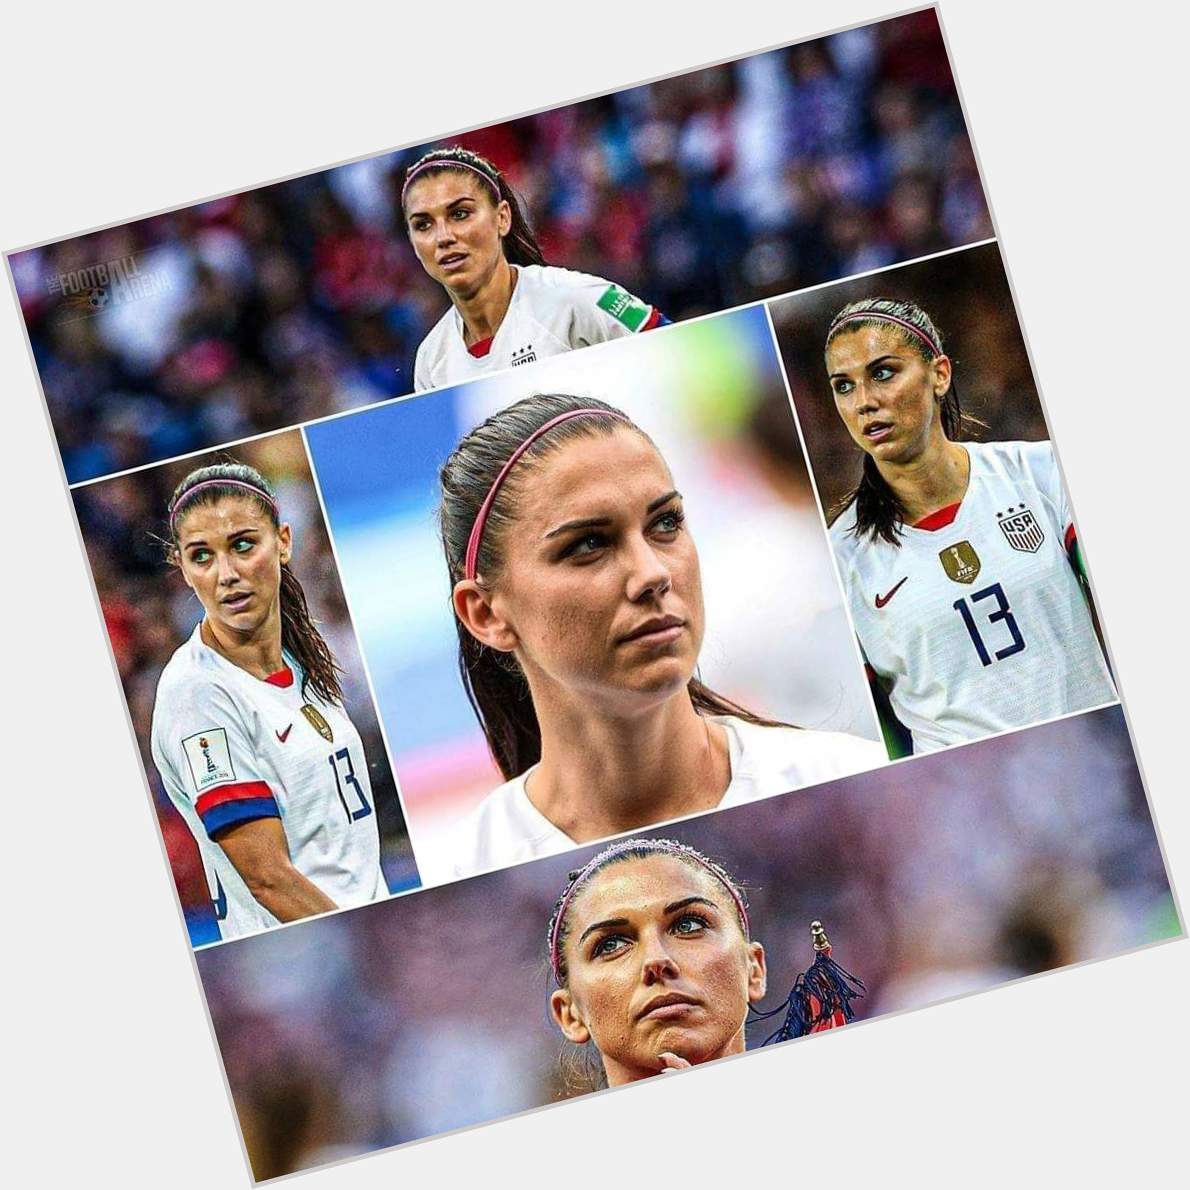 Happy birthday, Alex Morgan  One of the most beautiful women footballer in the world 